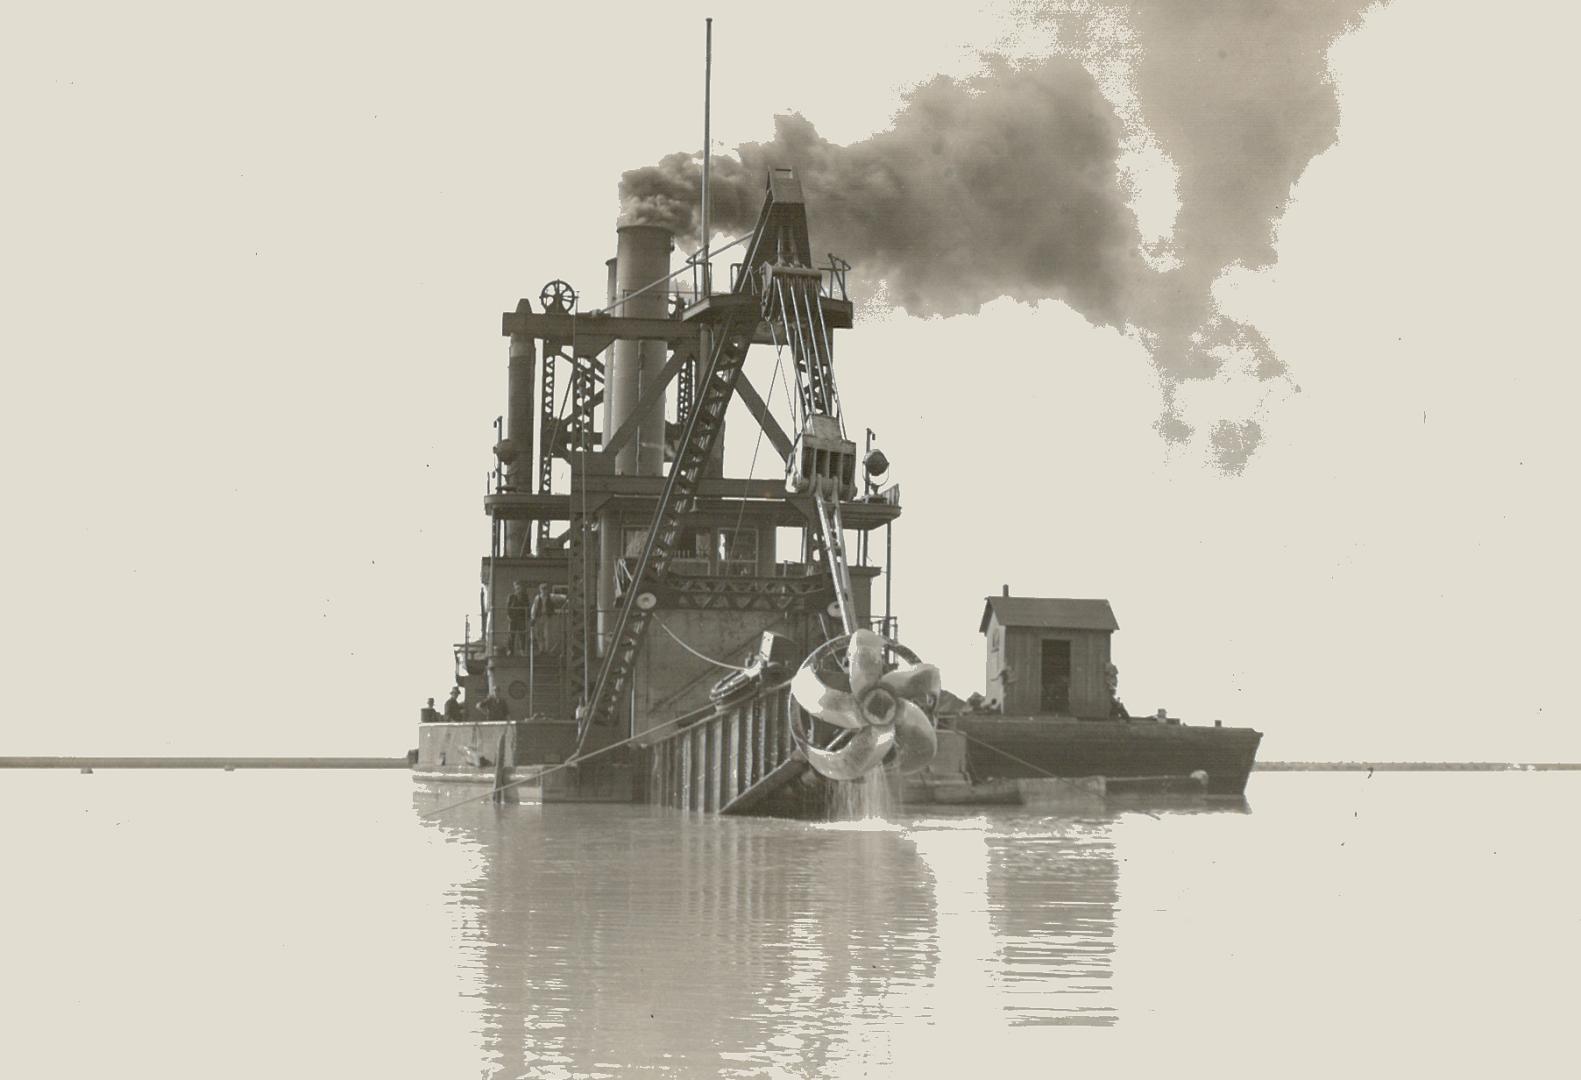 Image shows a ship on the lake.